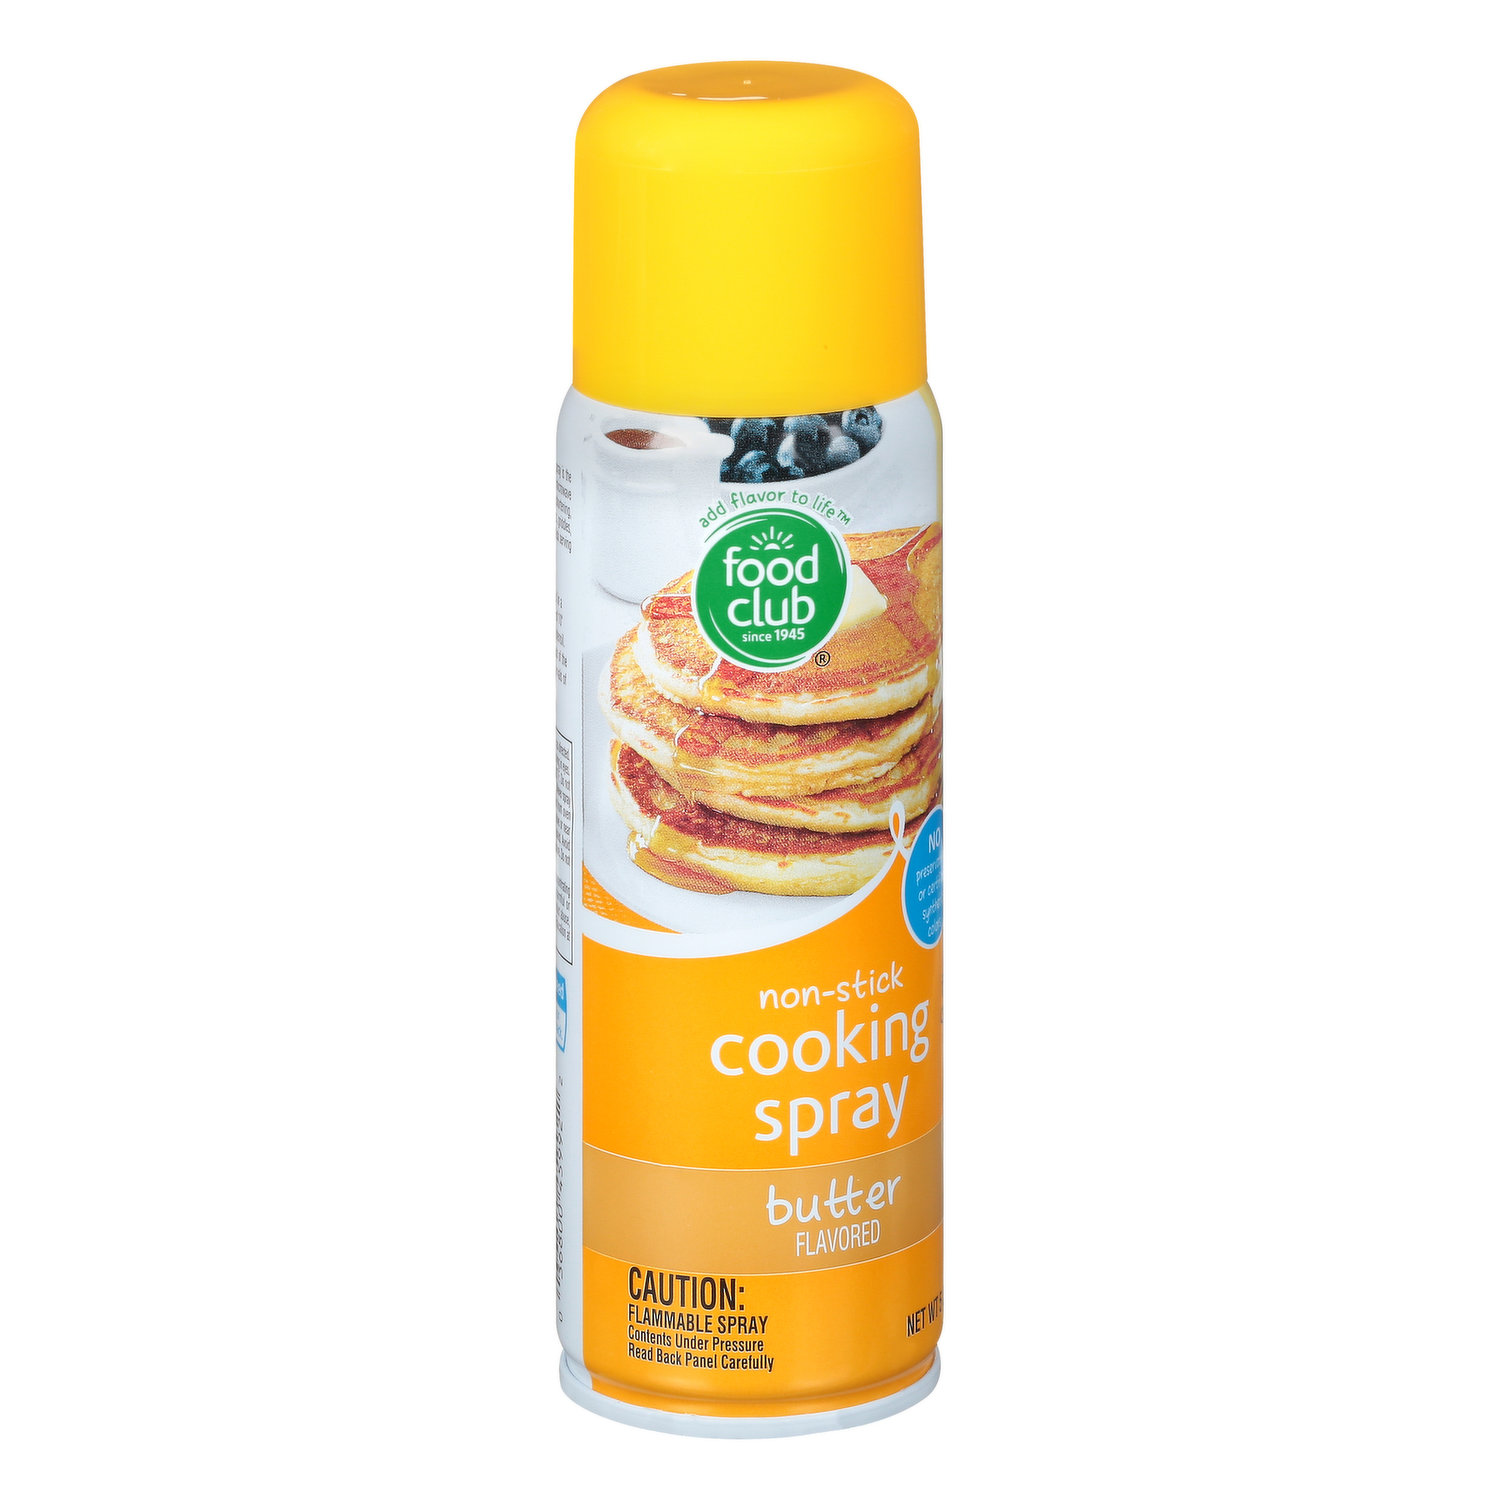 Food Club Cooking Spray, Grilling, Non-Stick